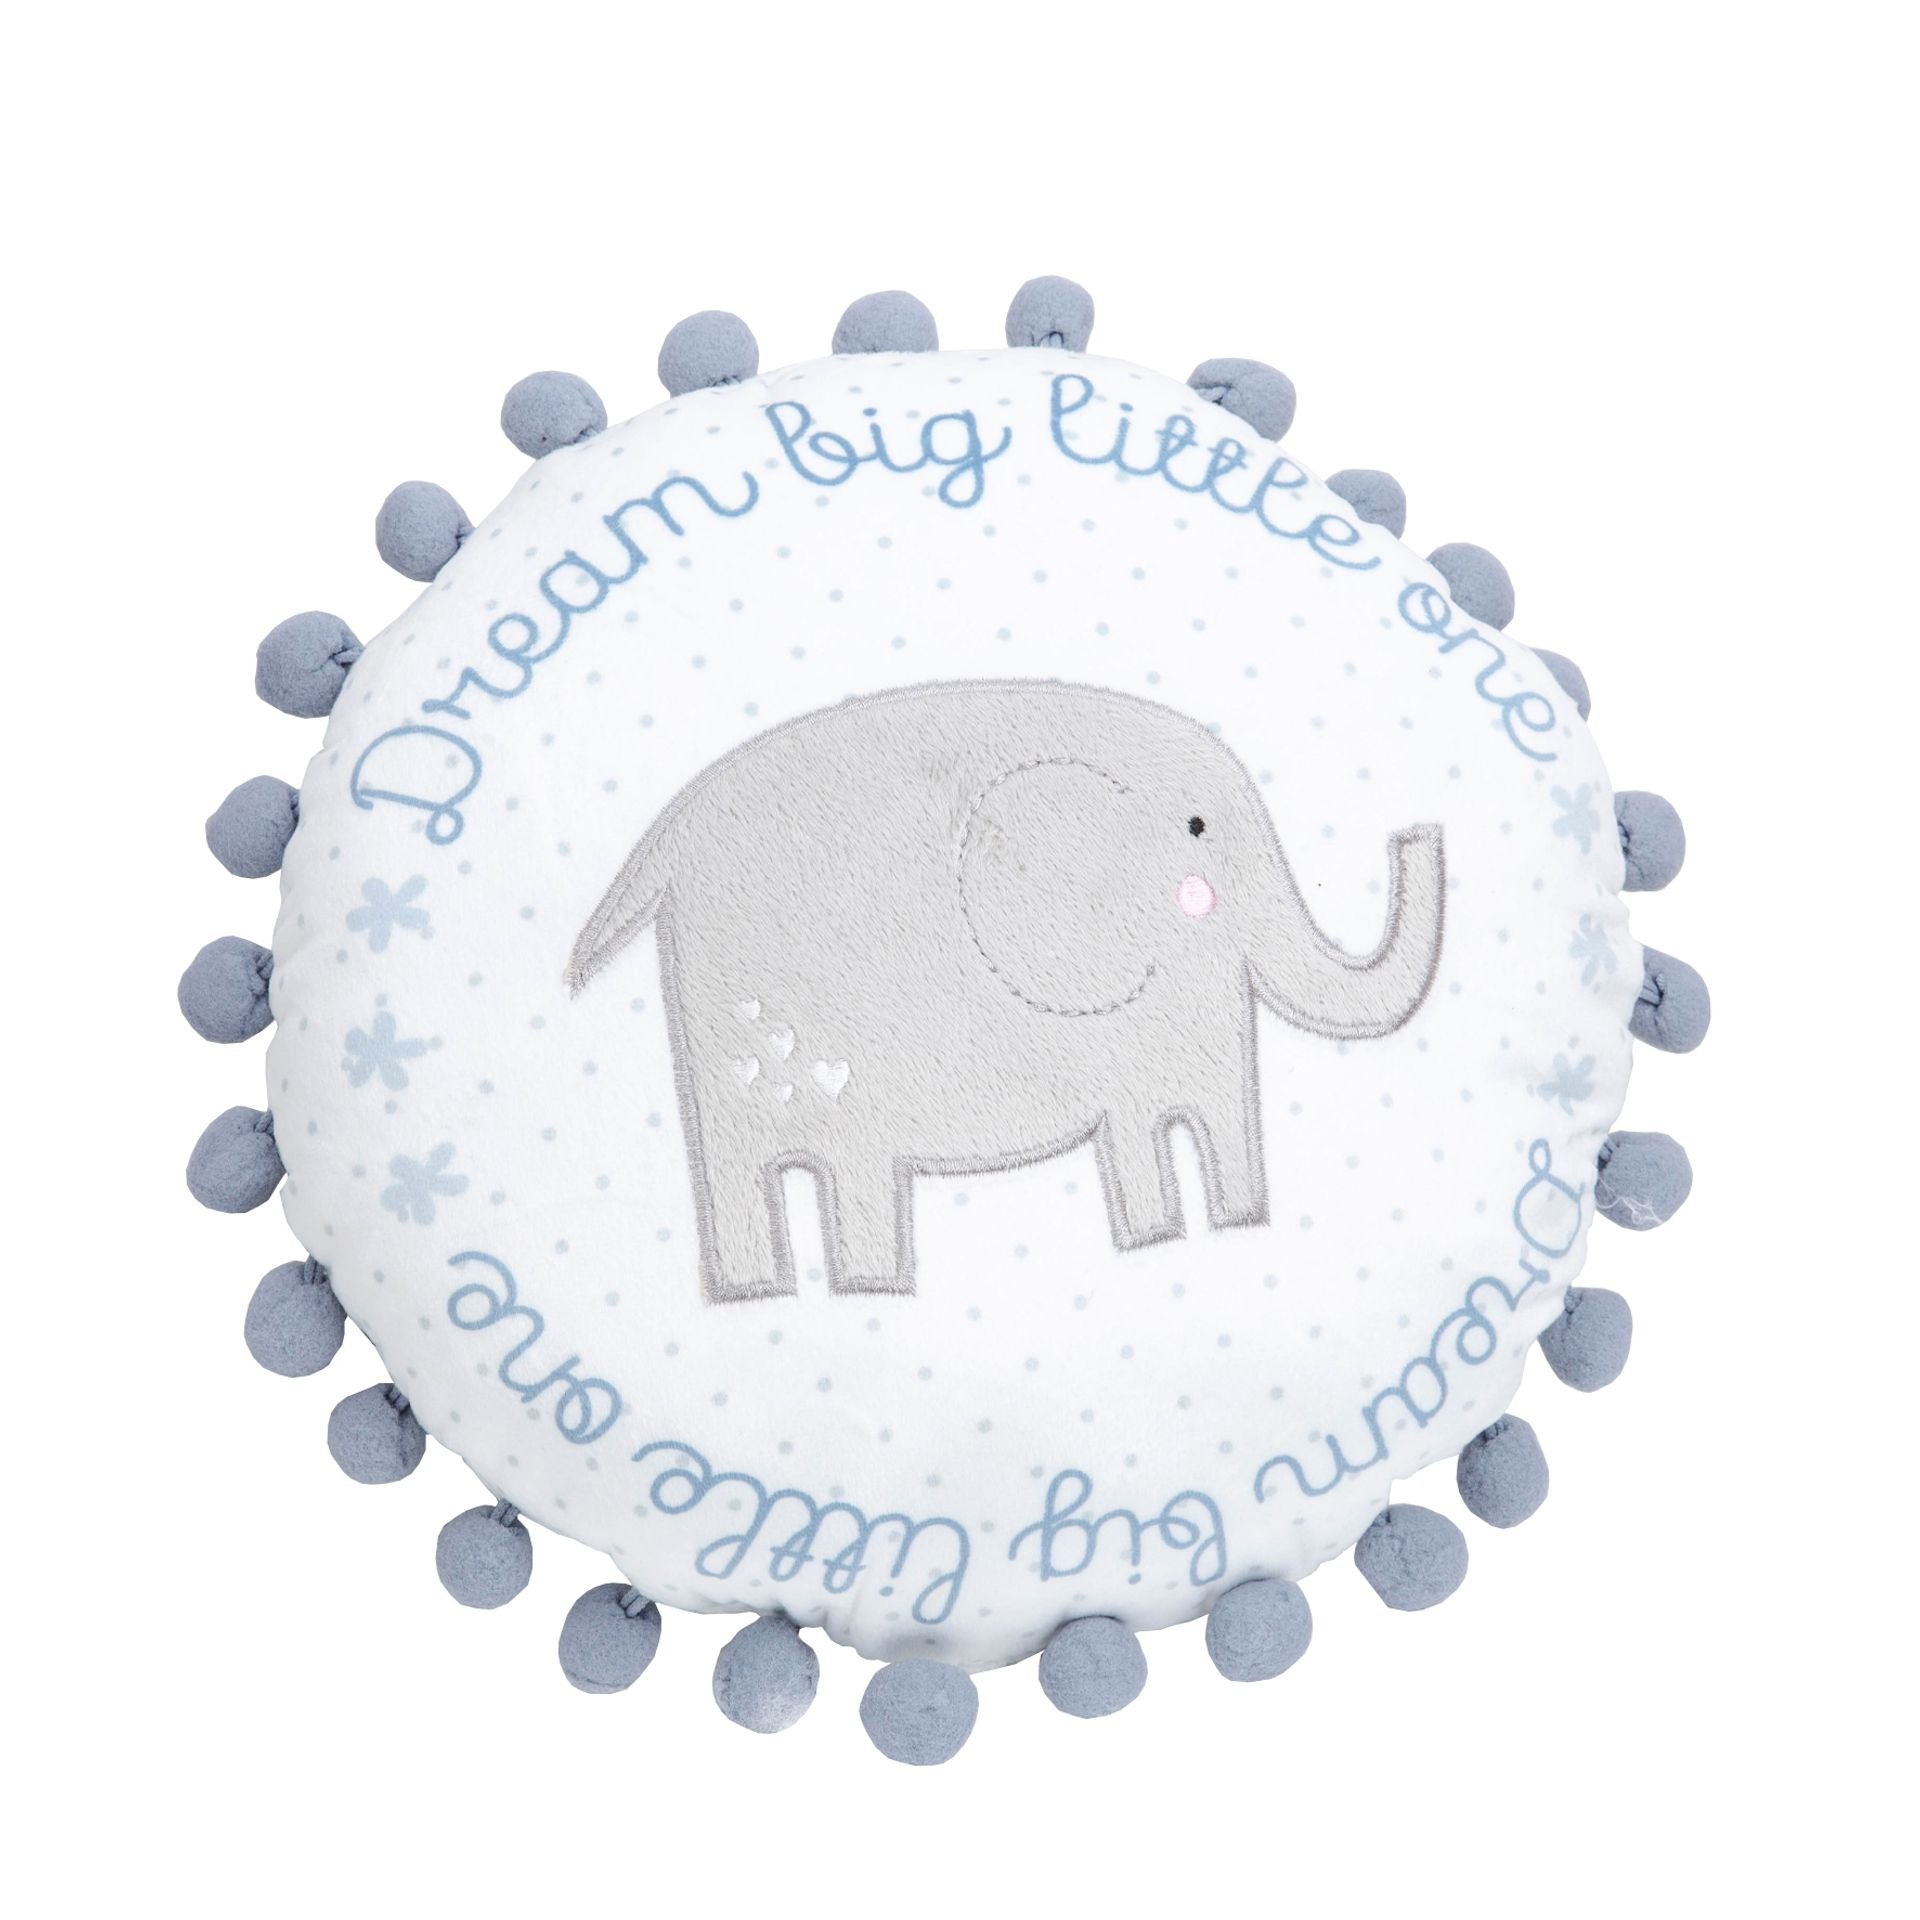 This super soft 30cm fabric cushion features a cute grey elephant design with blue border lettering and blue bobbly trim around the edge. The perfect comforting accessory for a little prince's room. Wipe clean only.